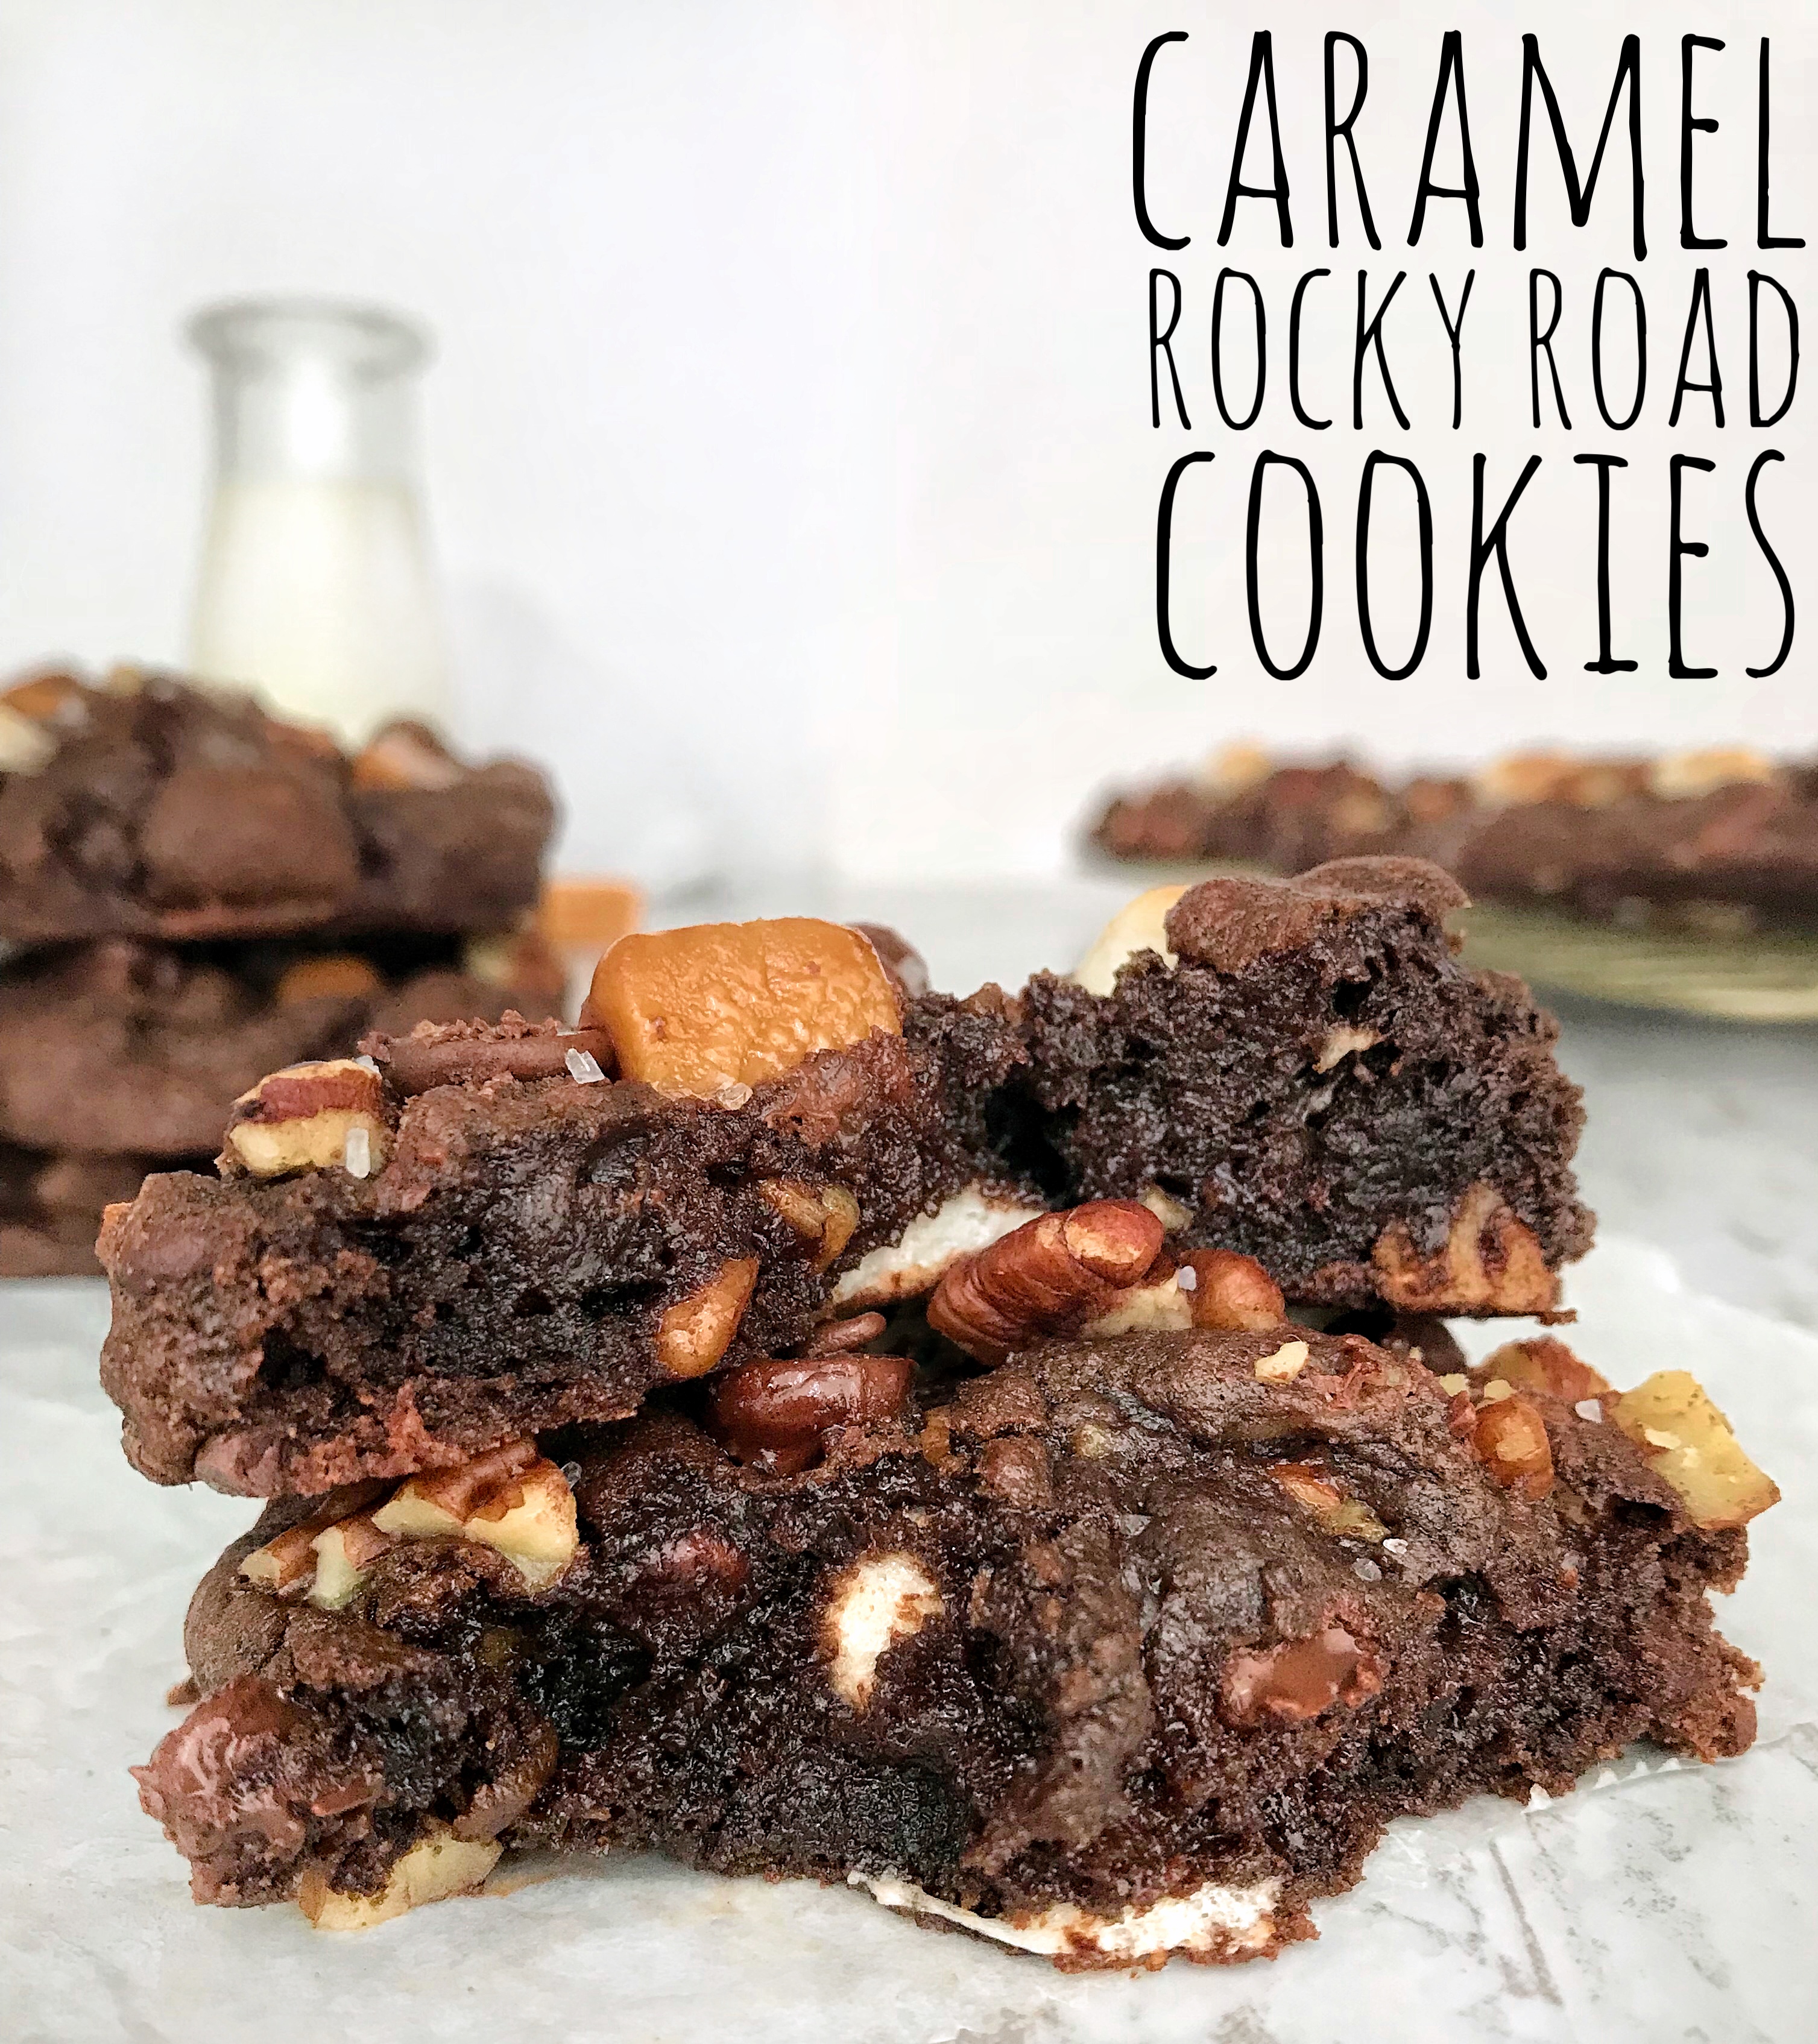 Try our caramel rocky road cookies